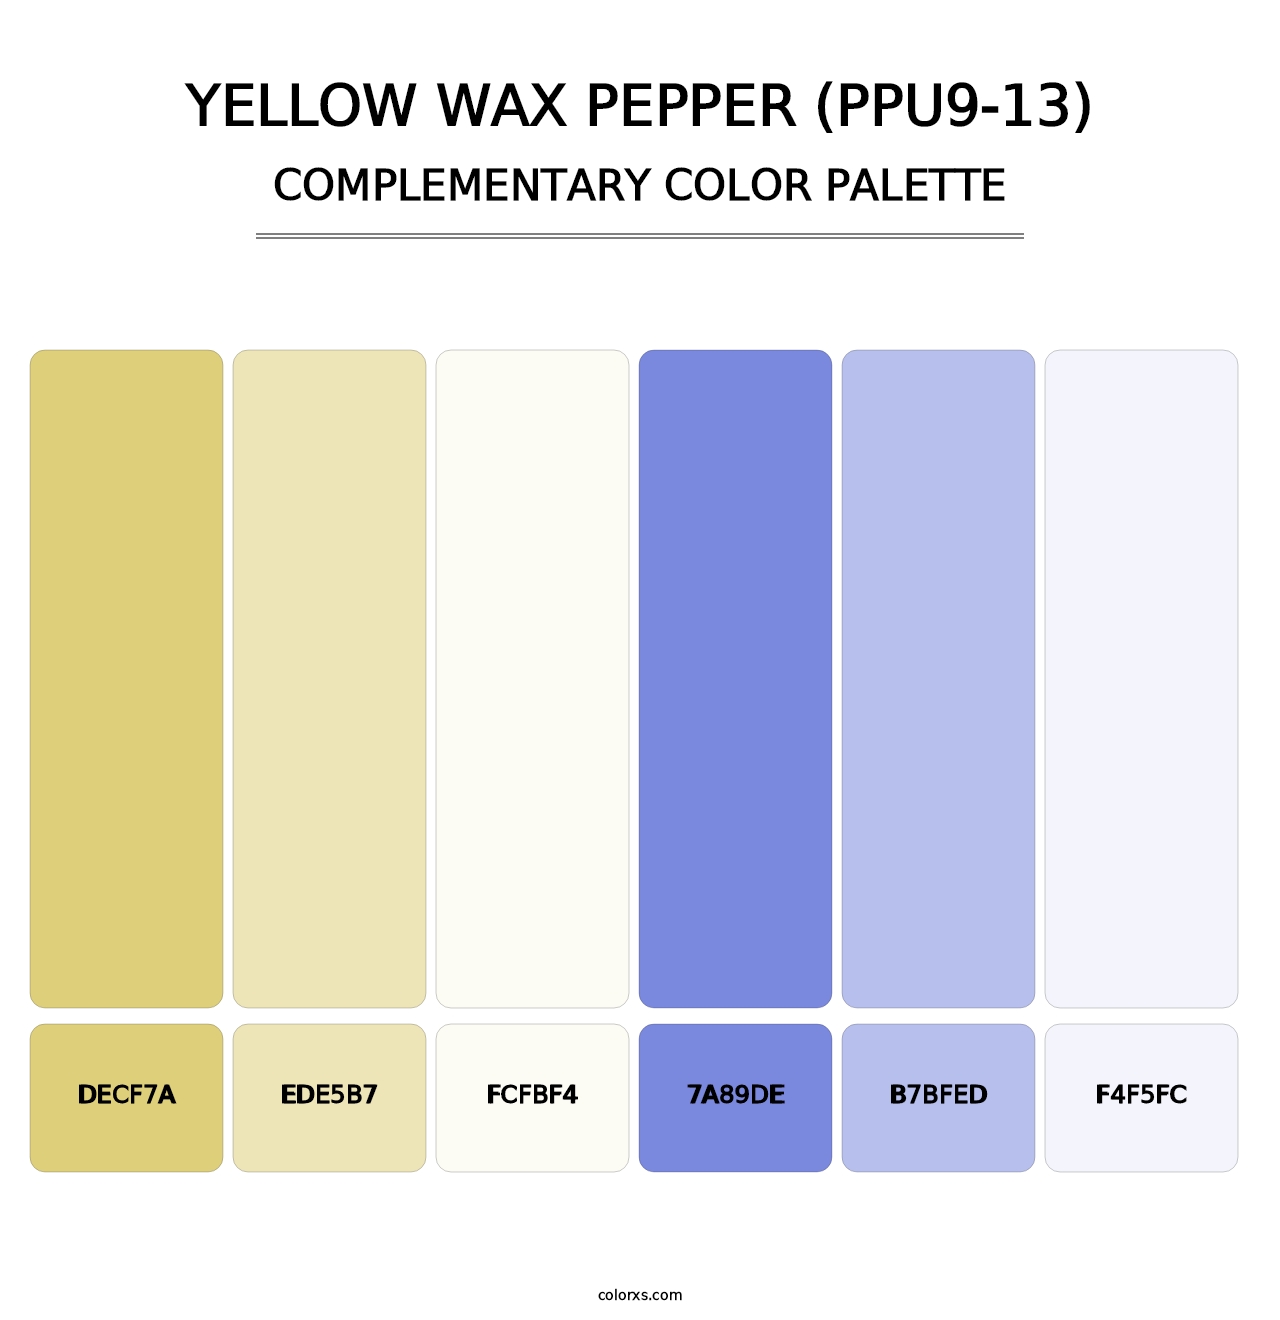 Yellow Wax Pepper (PPU9-13) - Complementary Color Palette